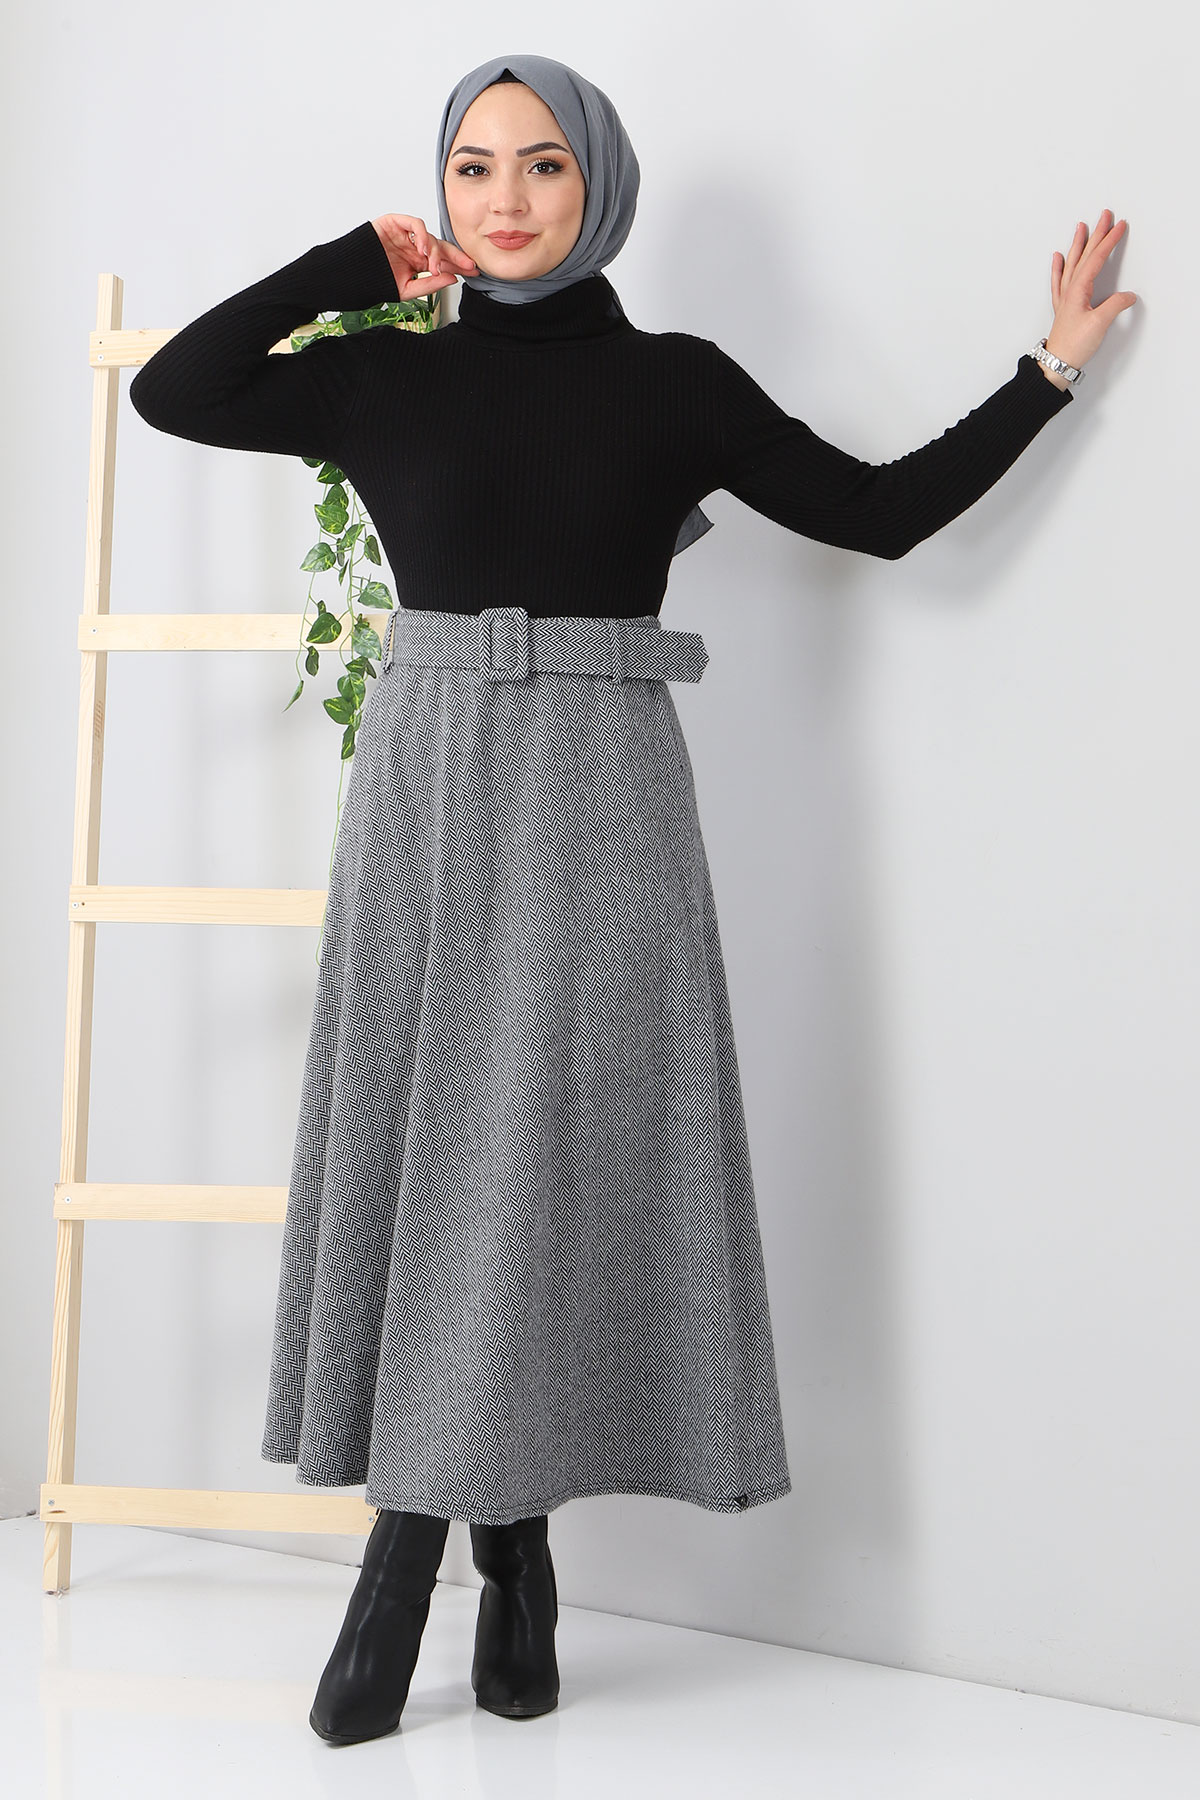 Long skirt in Grey color